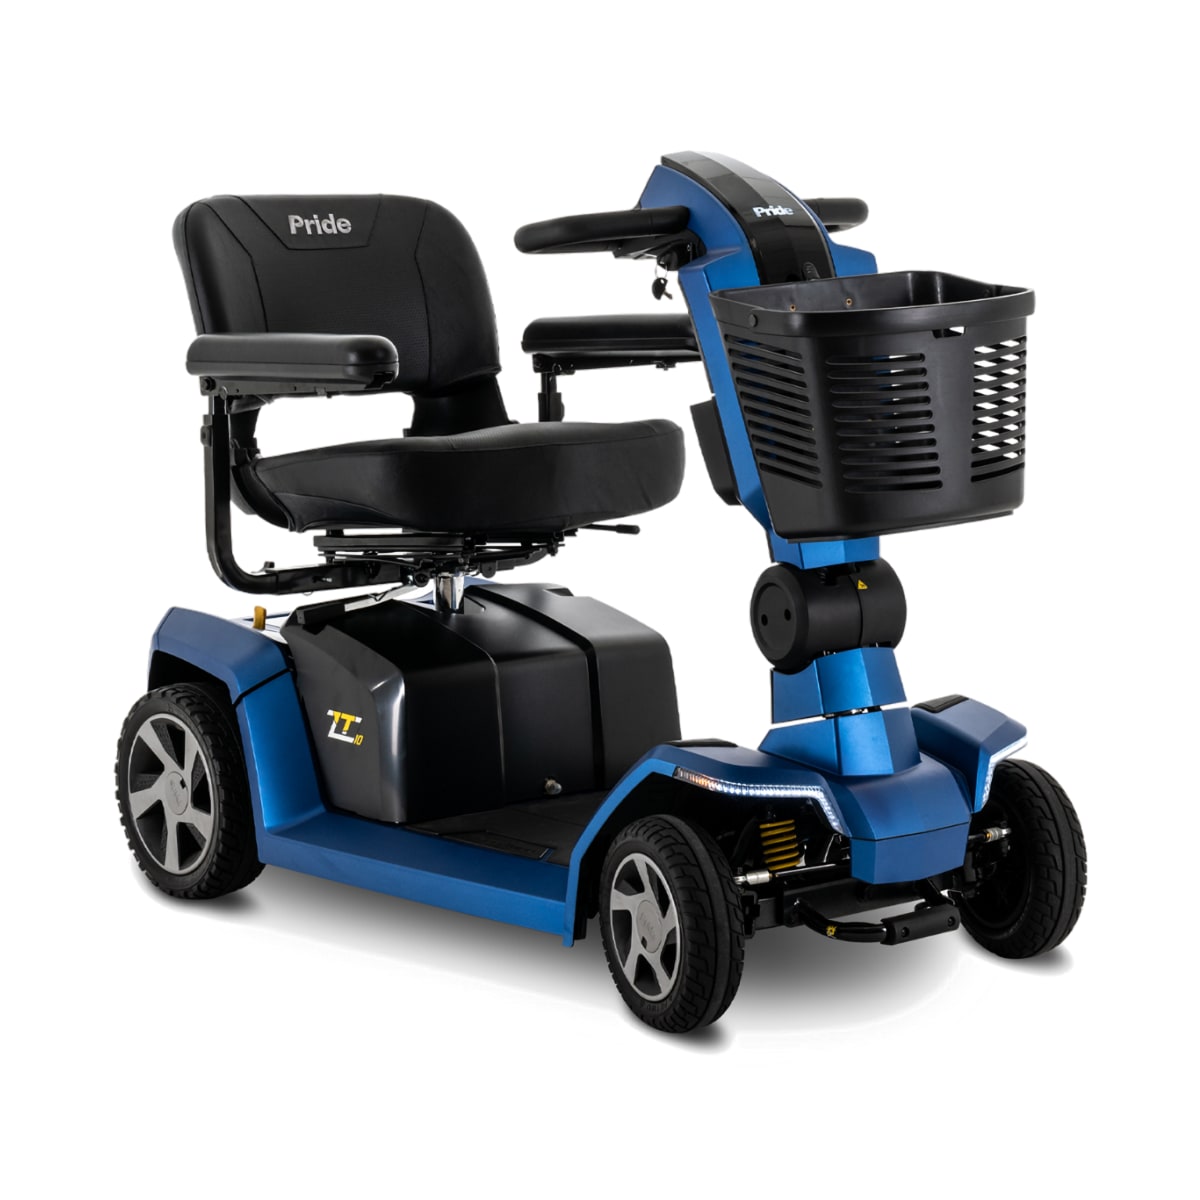 Pride Zero Turn 10 mobility scooter in black with blue accents